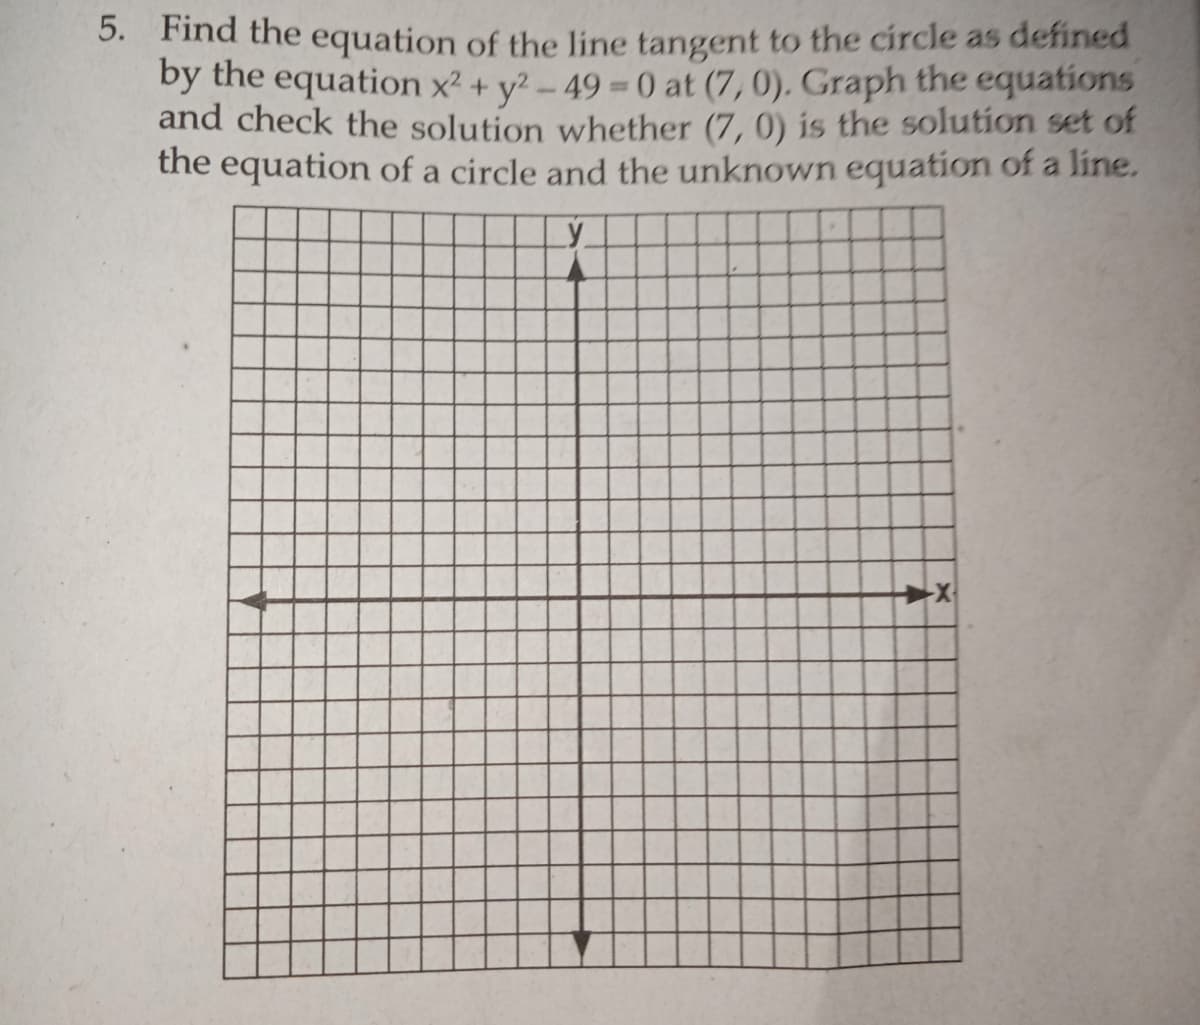 5. Find the equation of the line tangent to the circle as defined
by the equation x2 + y? - 49 0 at (7, 0). Graph the equations
and check the solution whether (7, 0) is the solution set of
the equation of a circle and the unknown equation of a line.
